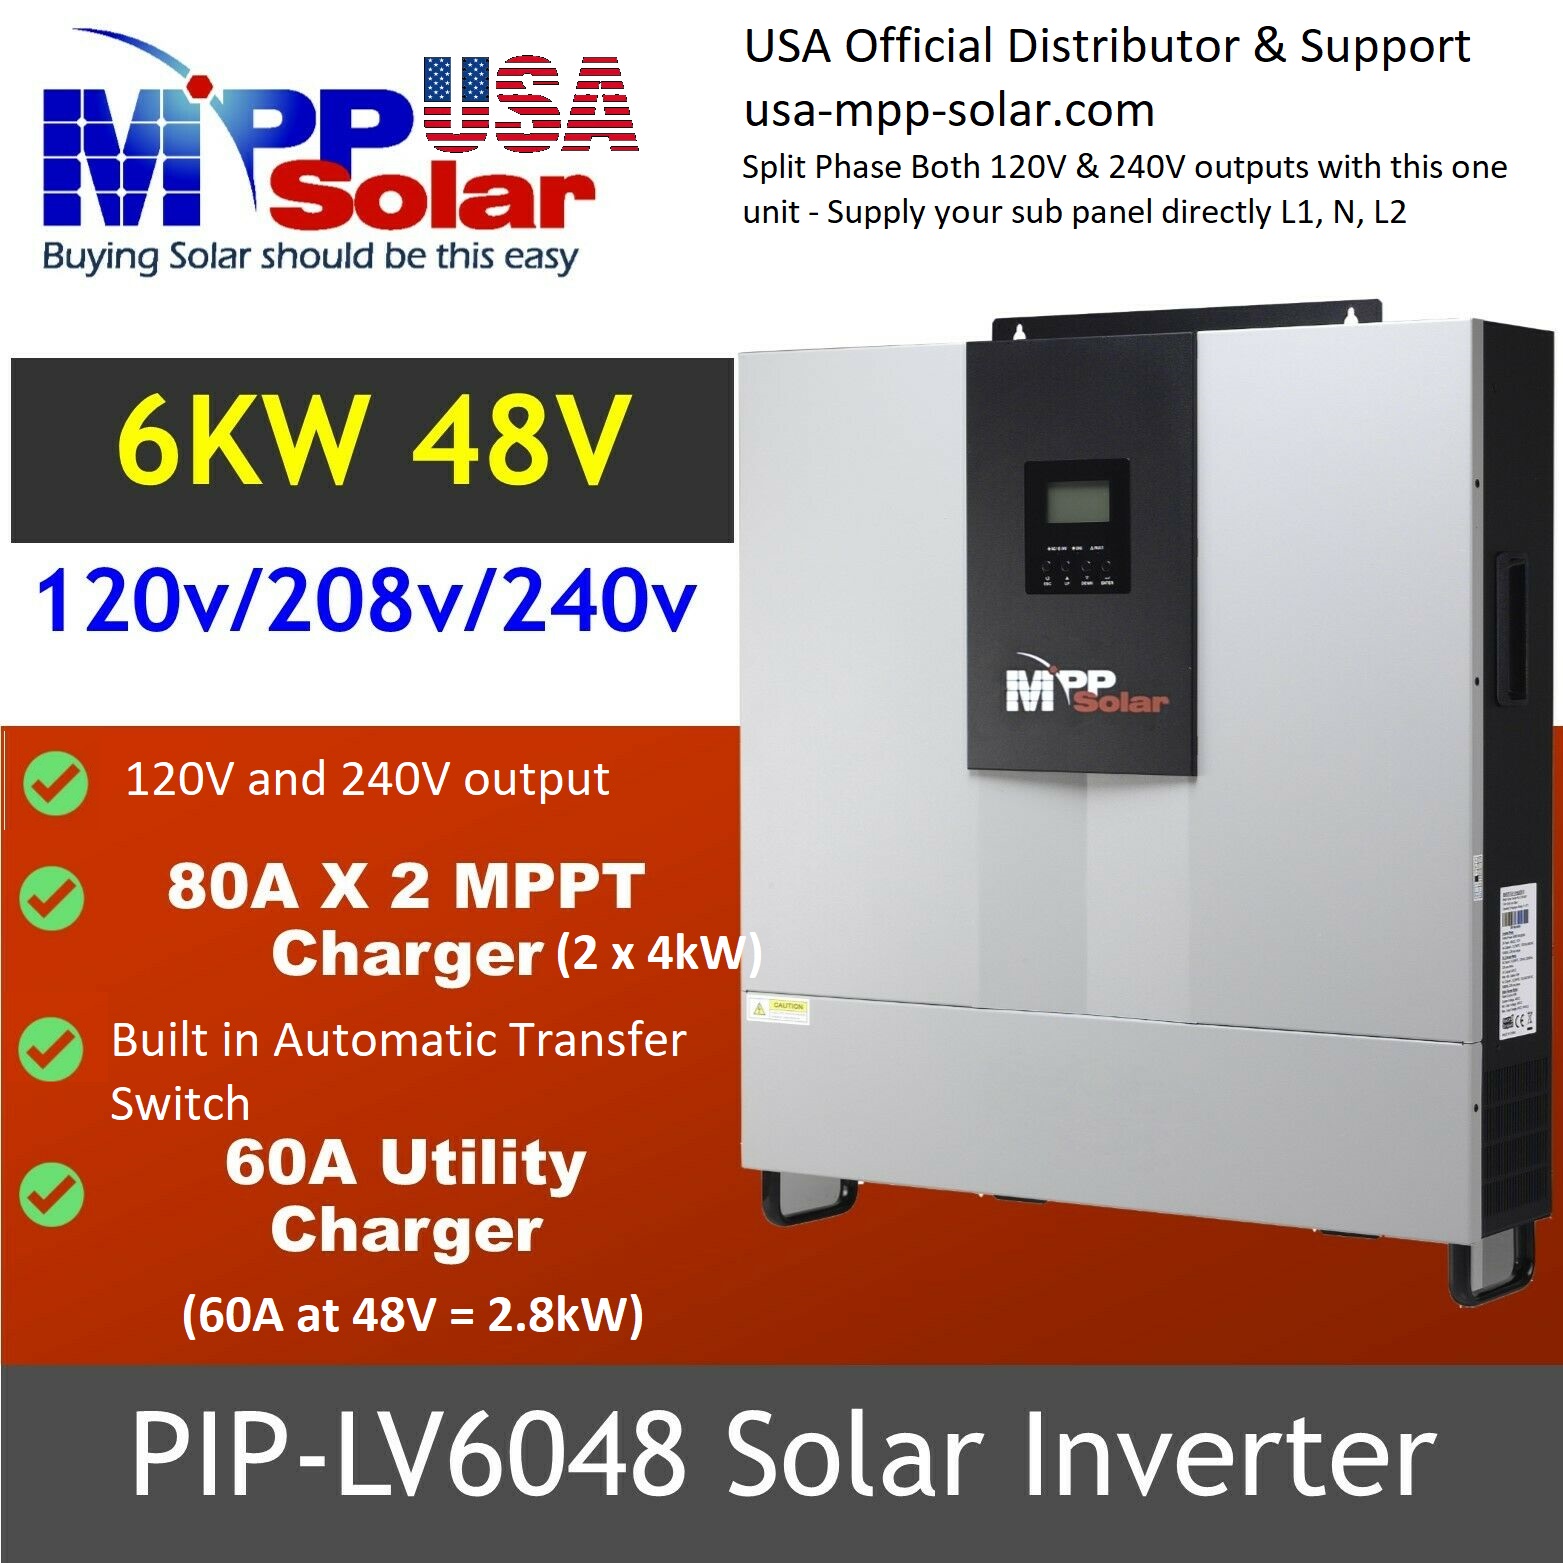 Combo Deal 6.5kw Inverter with 15kWh LifePO4 Rack Batteries, 4-2 Combiner  box, 5 rack, 150A DC Breaker